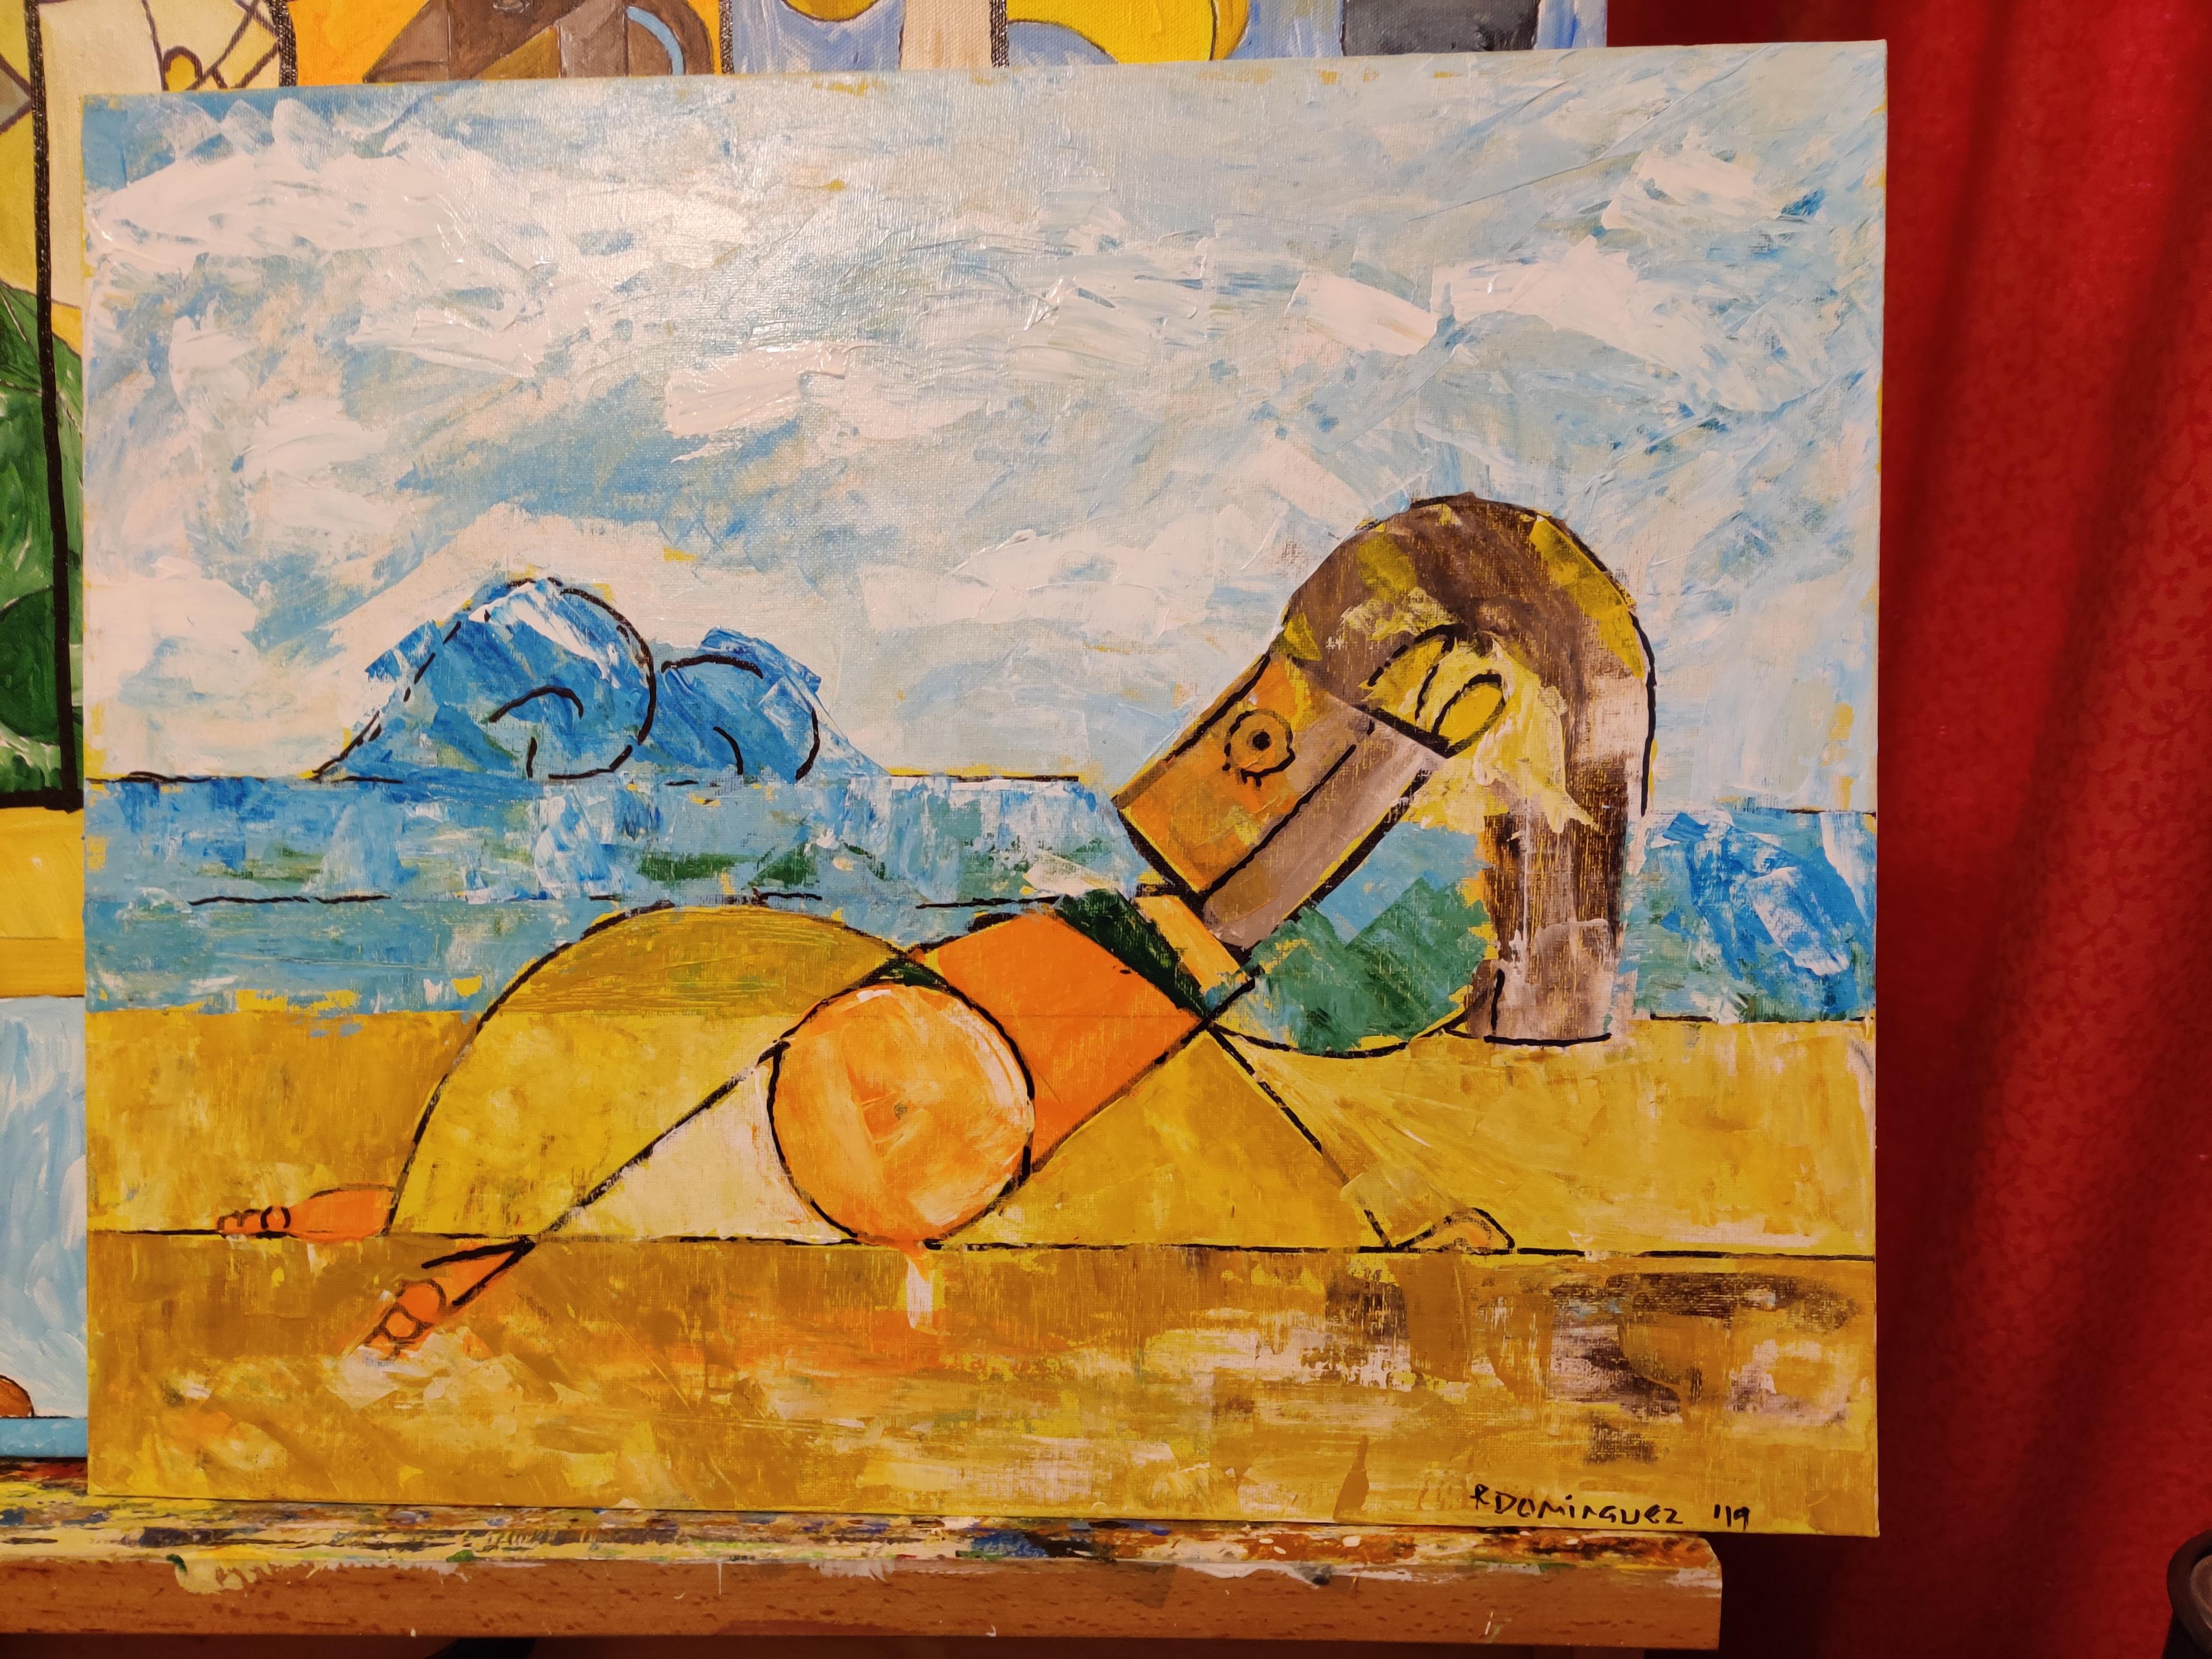 Abstract painting of sunbather on a beach